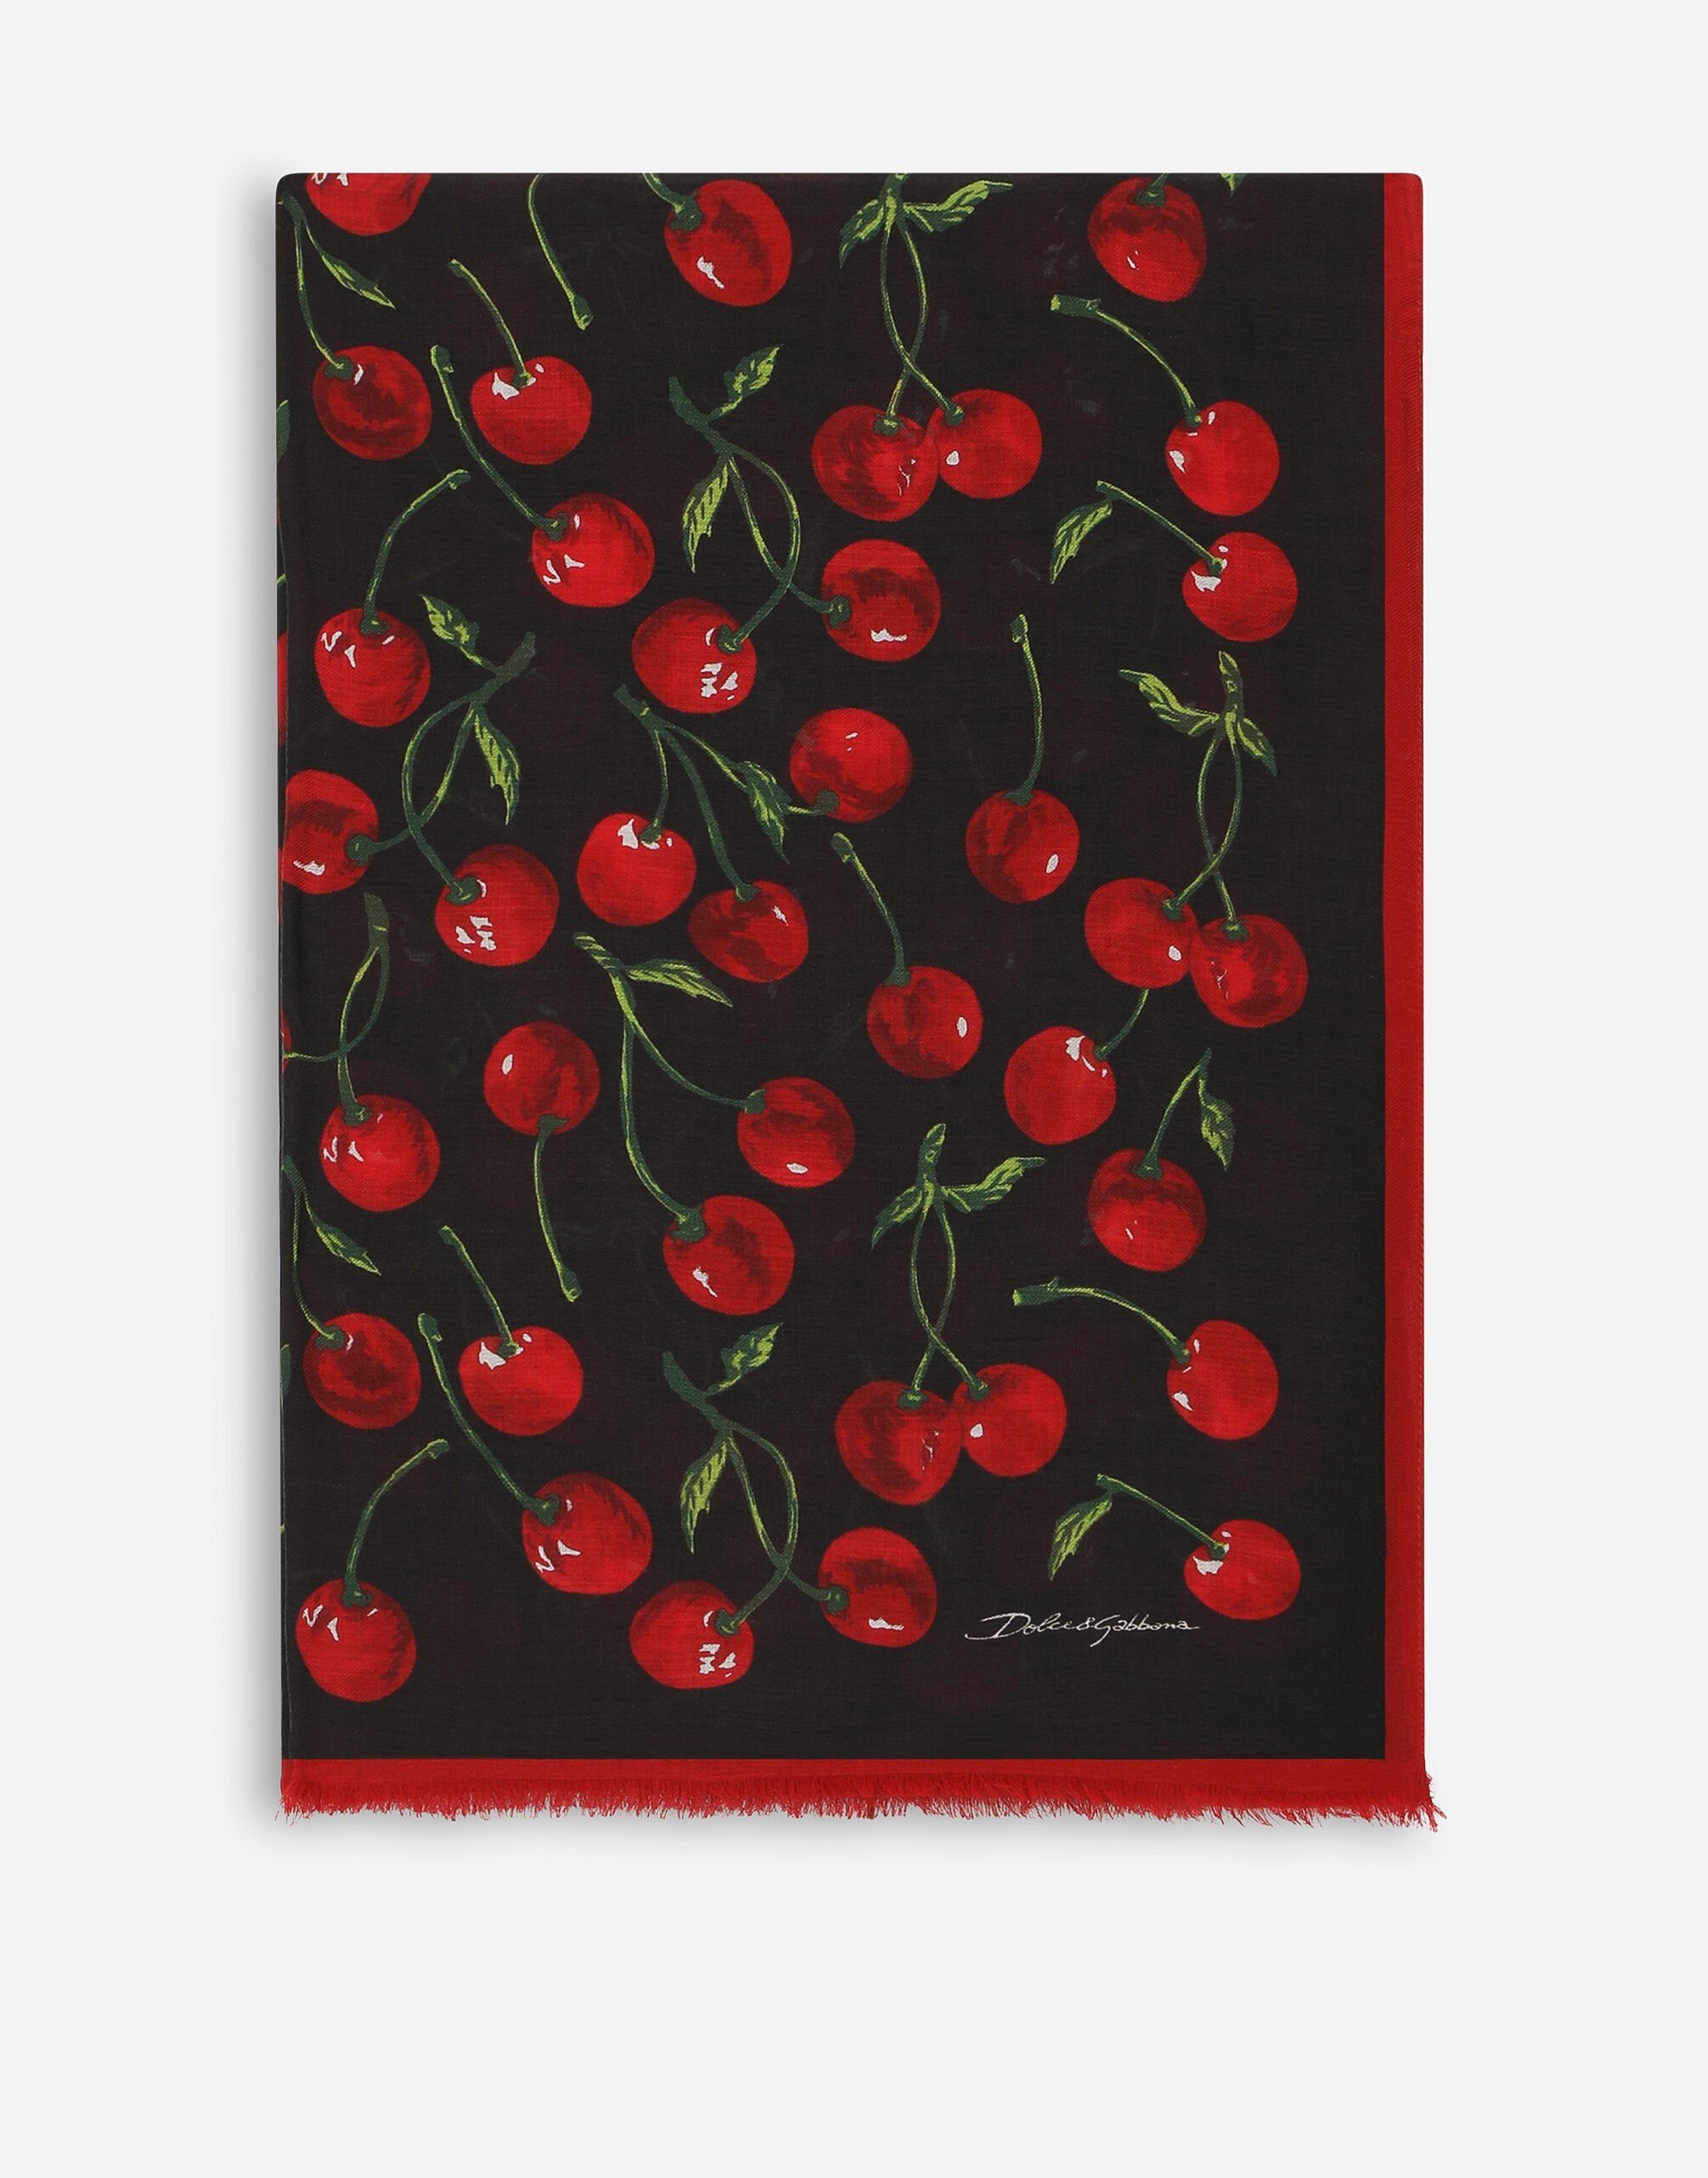 Dolce & Gabbana Cherry-print cashmere and modal scarf (135x200) Multicolor FXI31TJAWP4